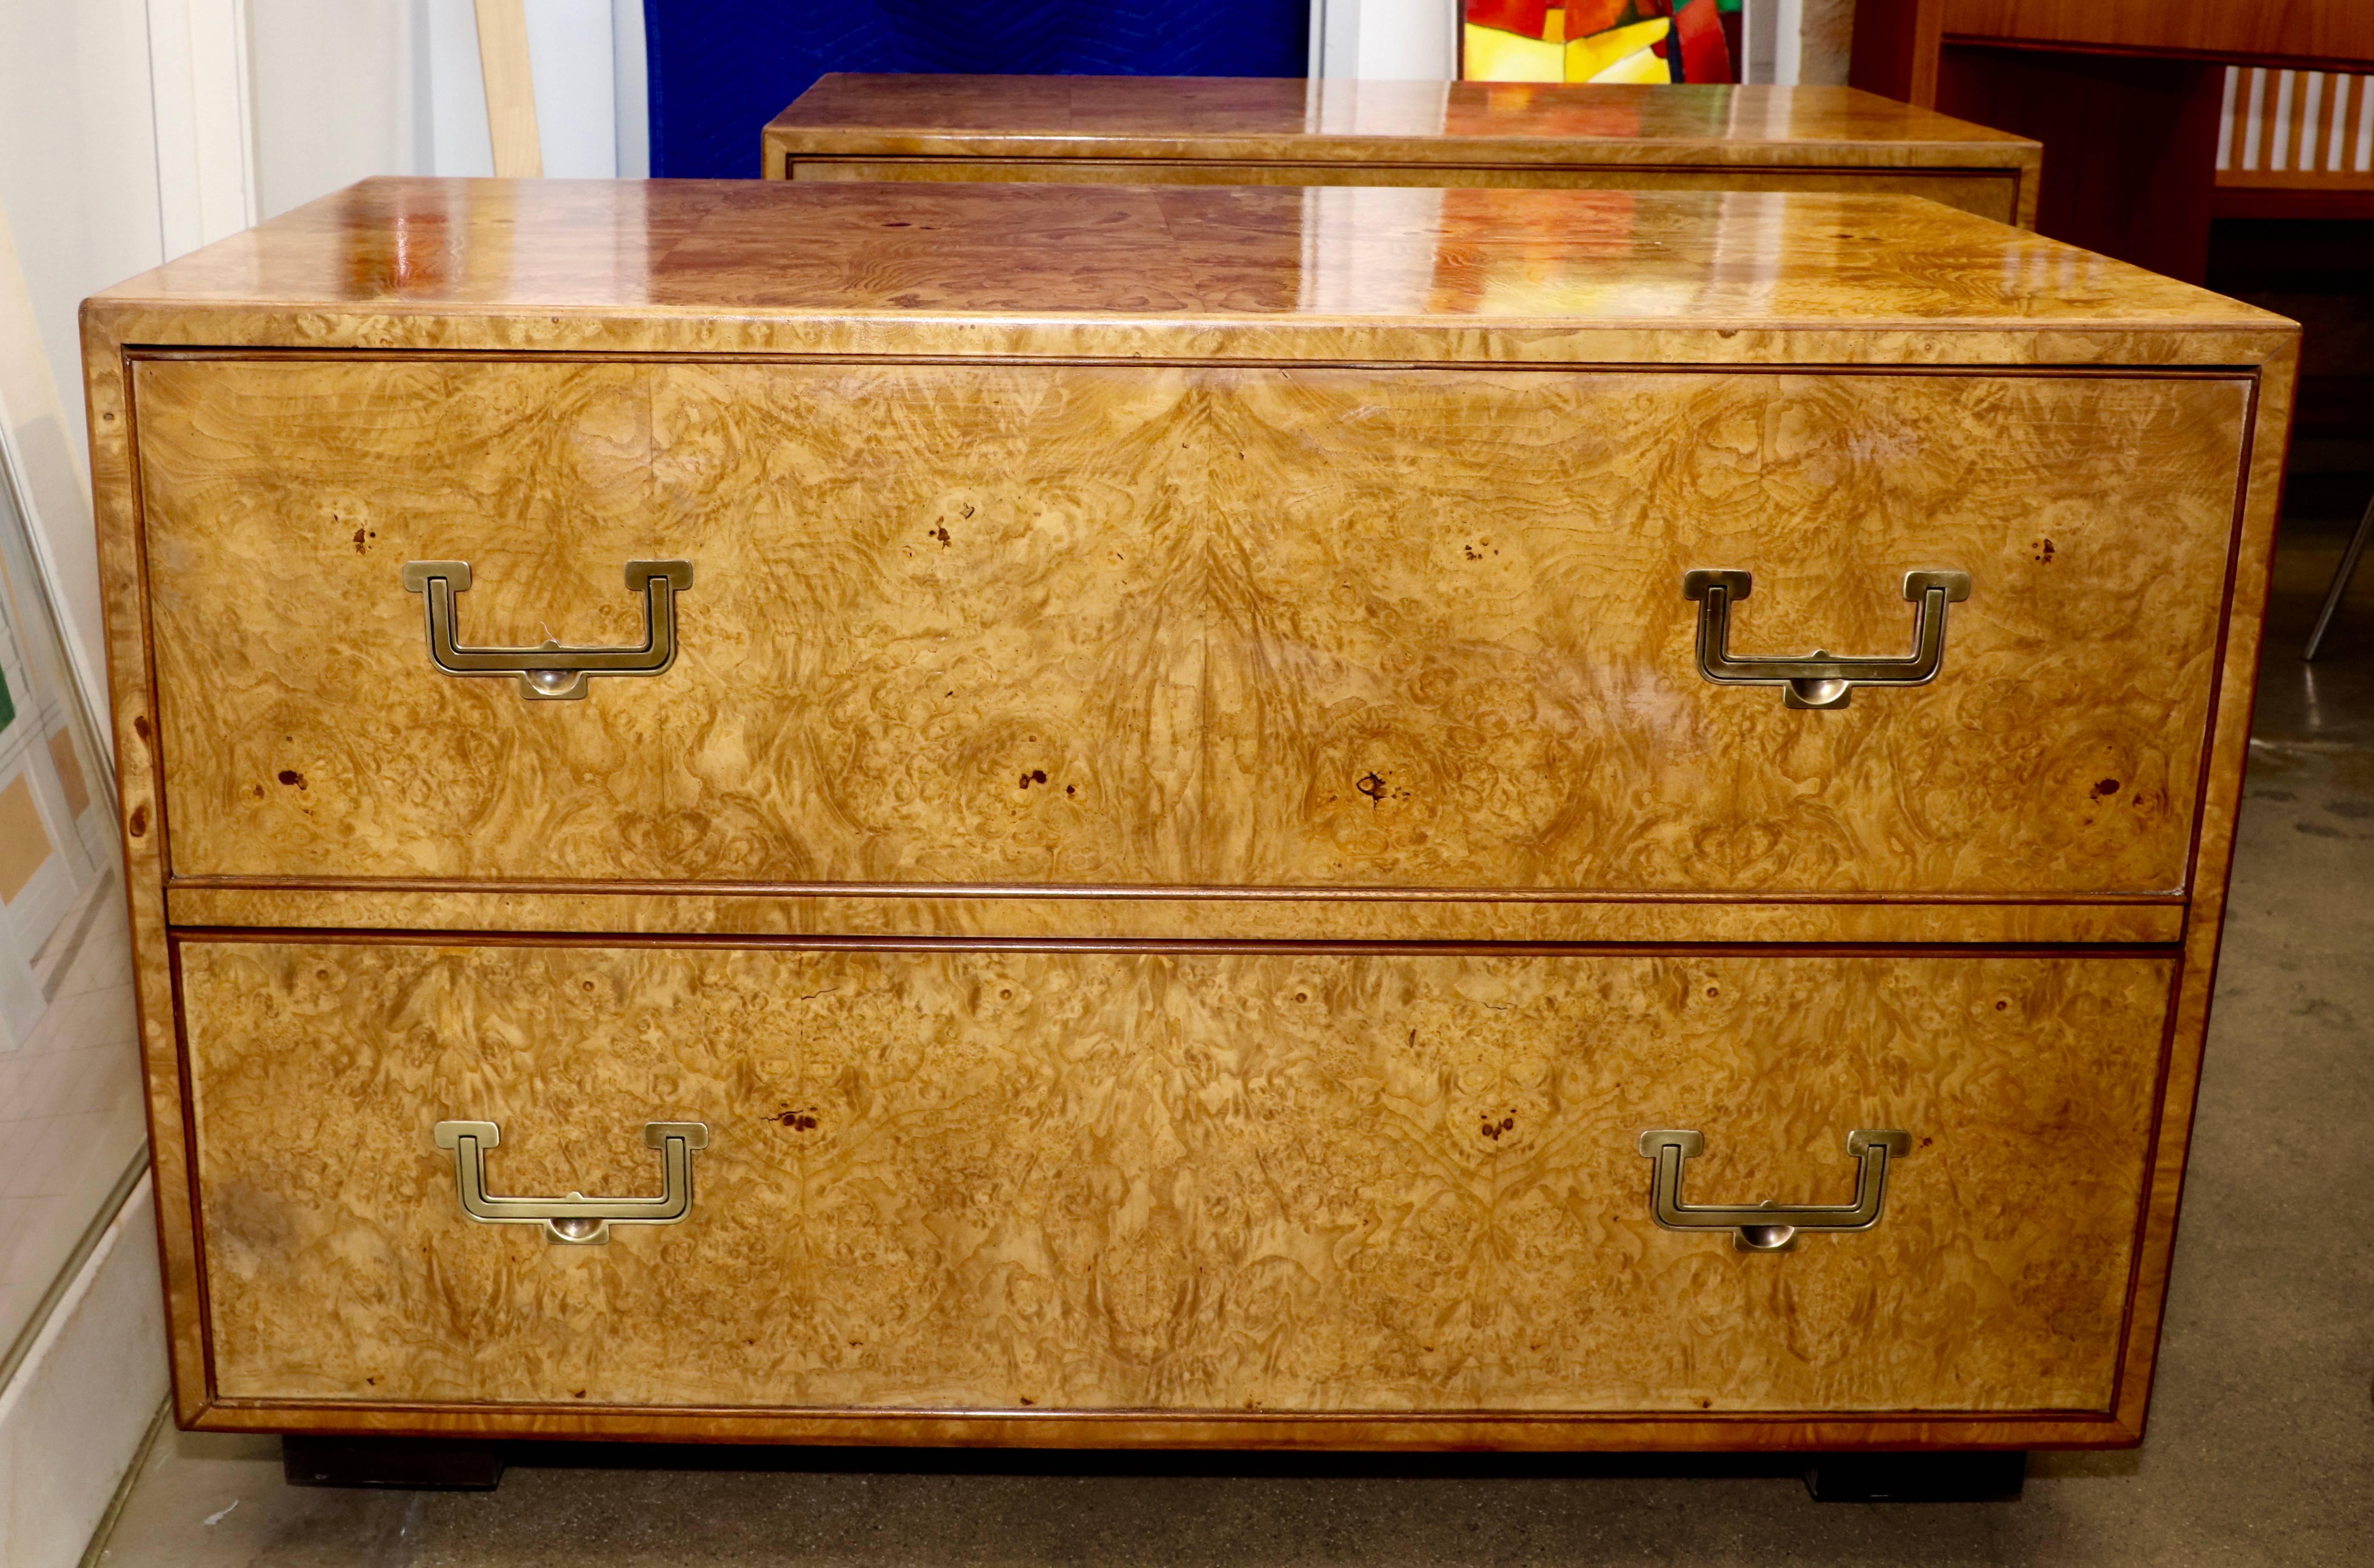 A nice pair of Campaign style end tables or nightstand veneered in a nice fuel finish. These stand have two drawers each and feature the Widdicomb gold label. They have had the tops redone, which are a little glossier than the sides. One drawer has